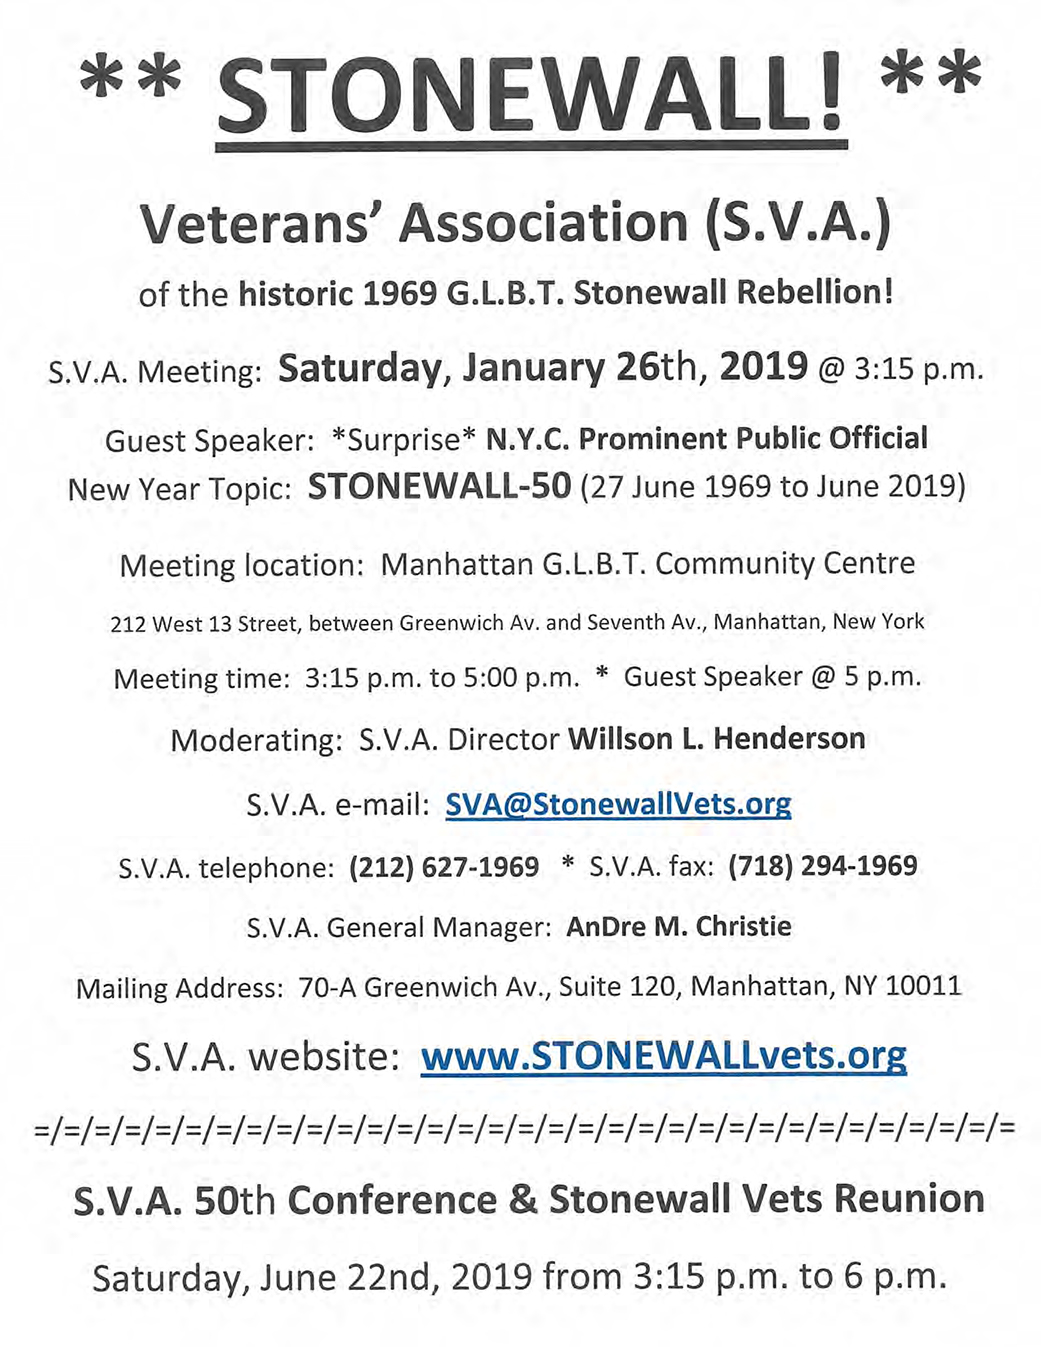 S.V.A. Monthly Meeting - Saturday 26, 2019